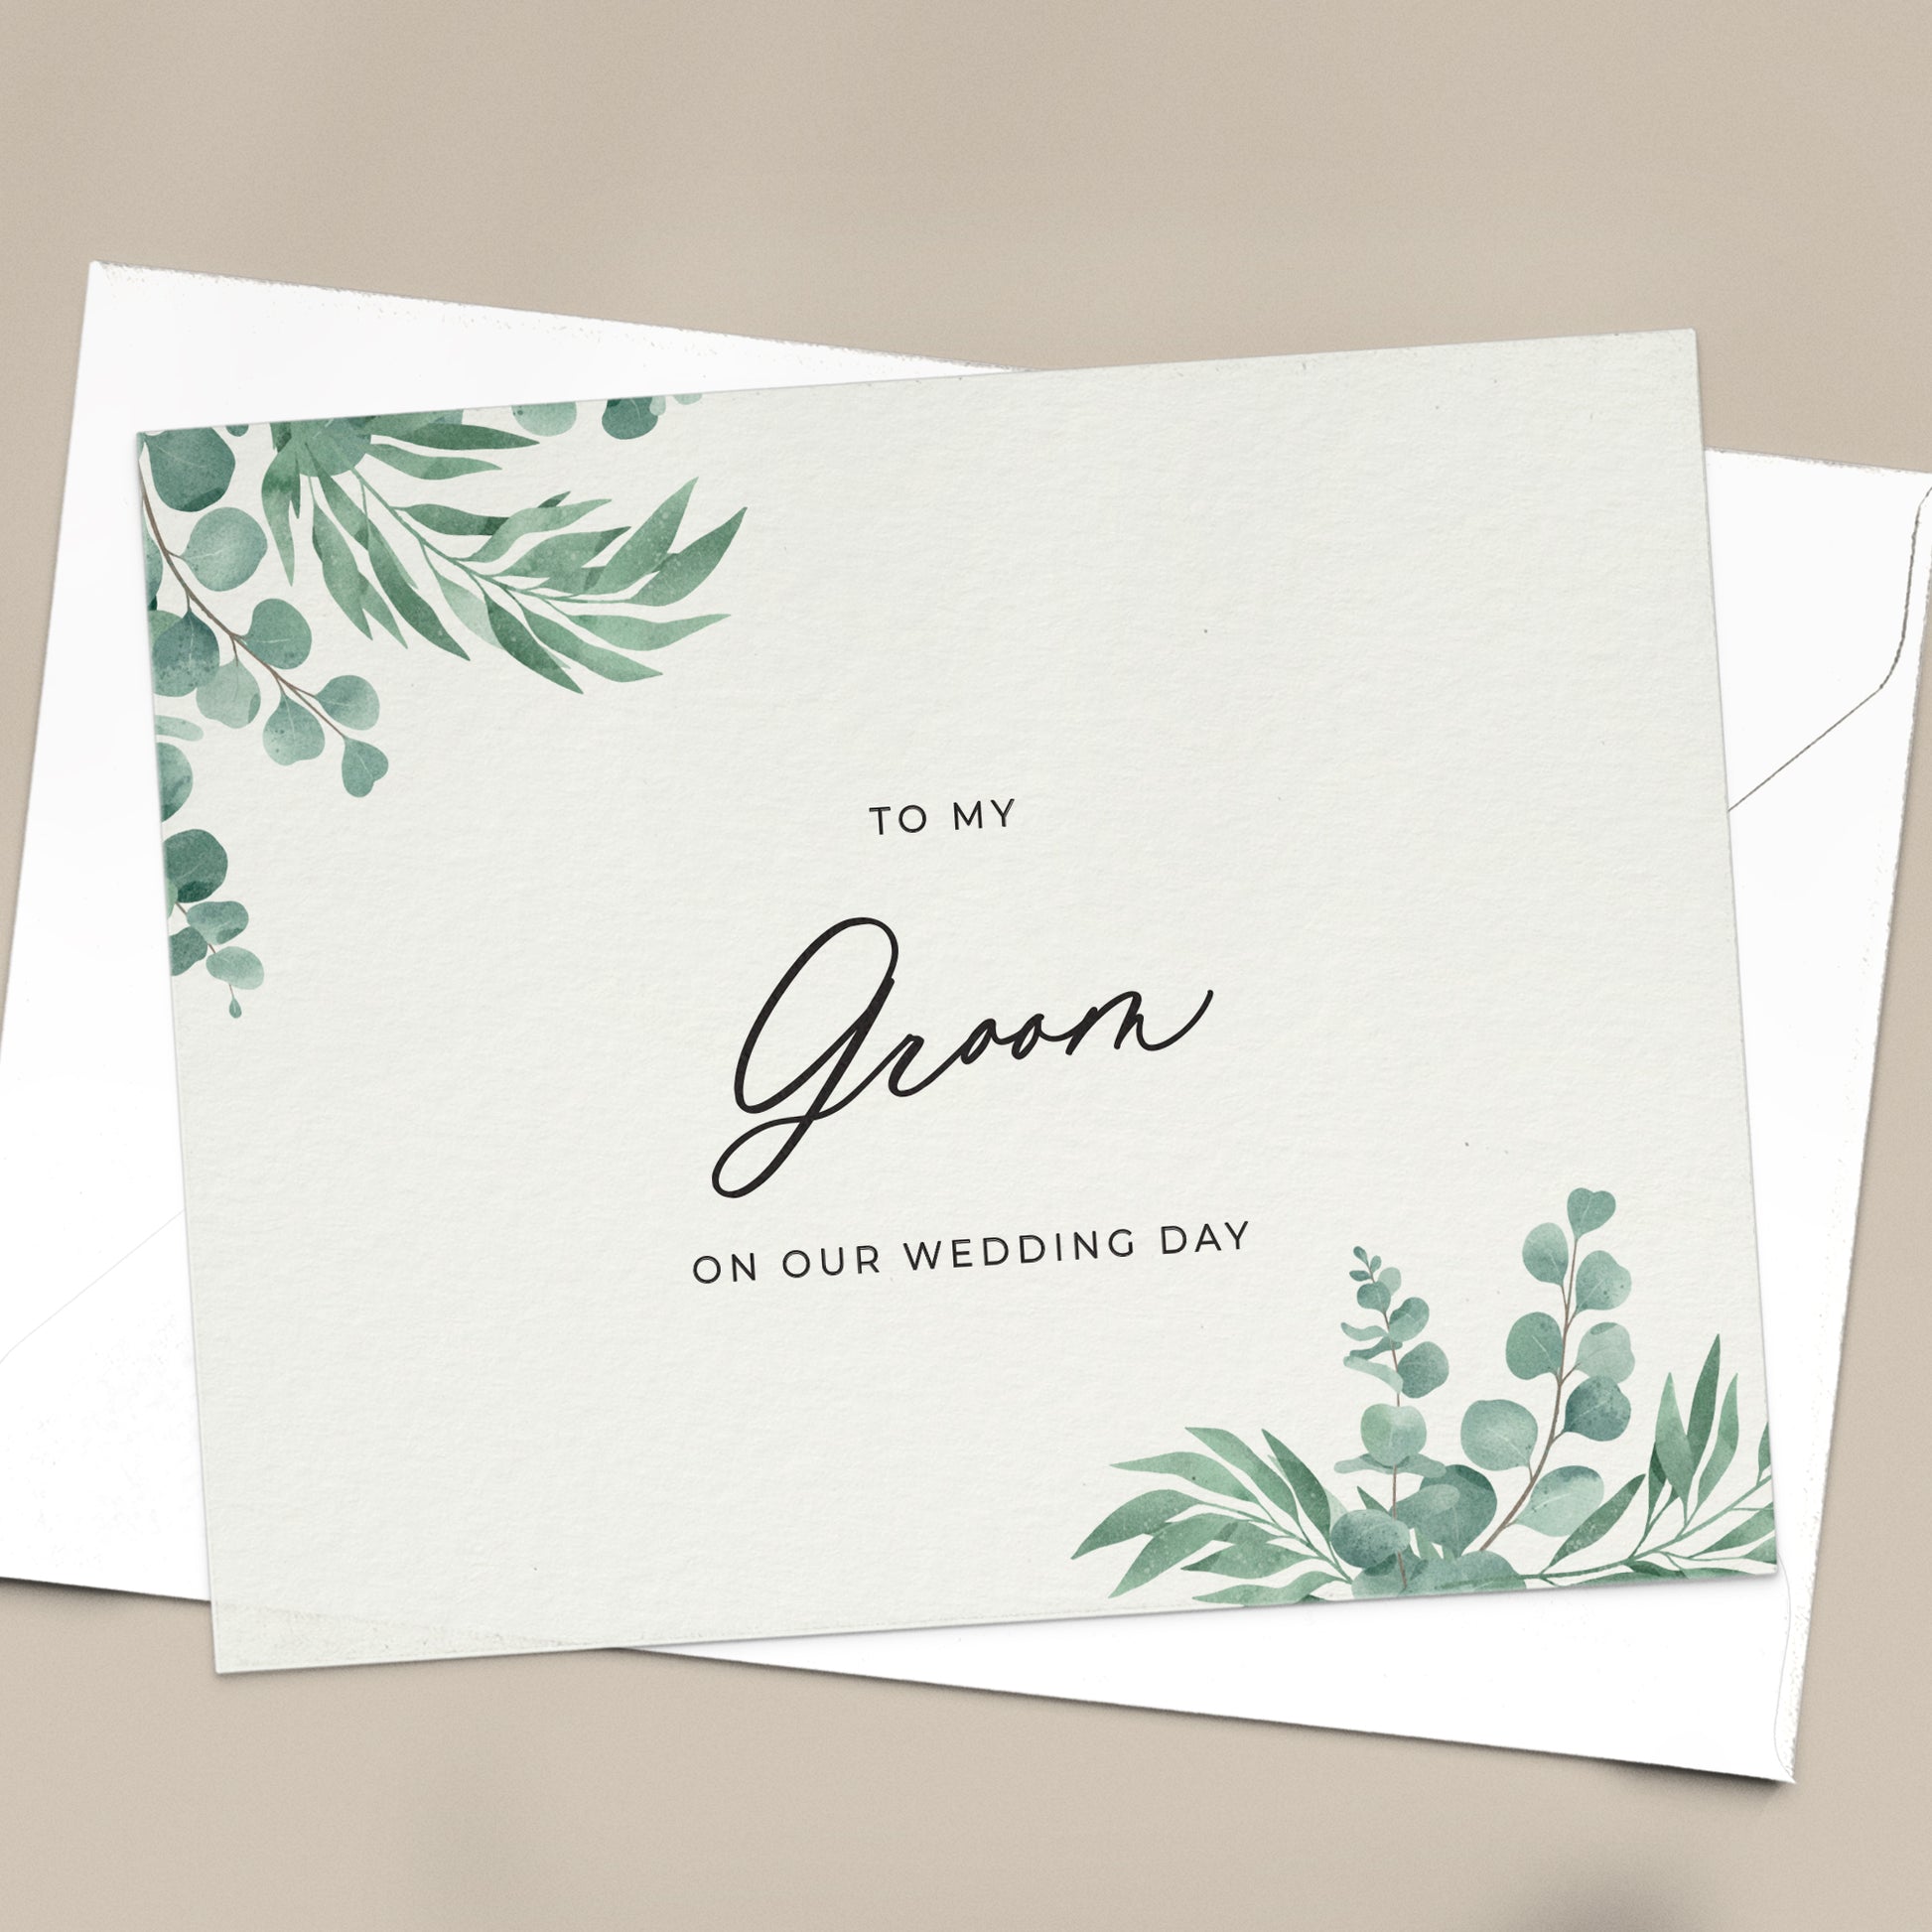 To my groom on our wedding day note card in greenery design with eucalyptus leaves and calligraphy font from XOXOKristen.